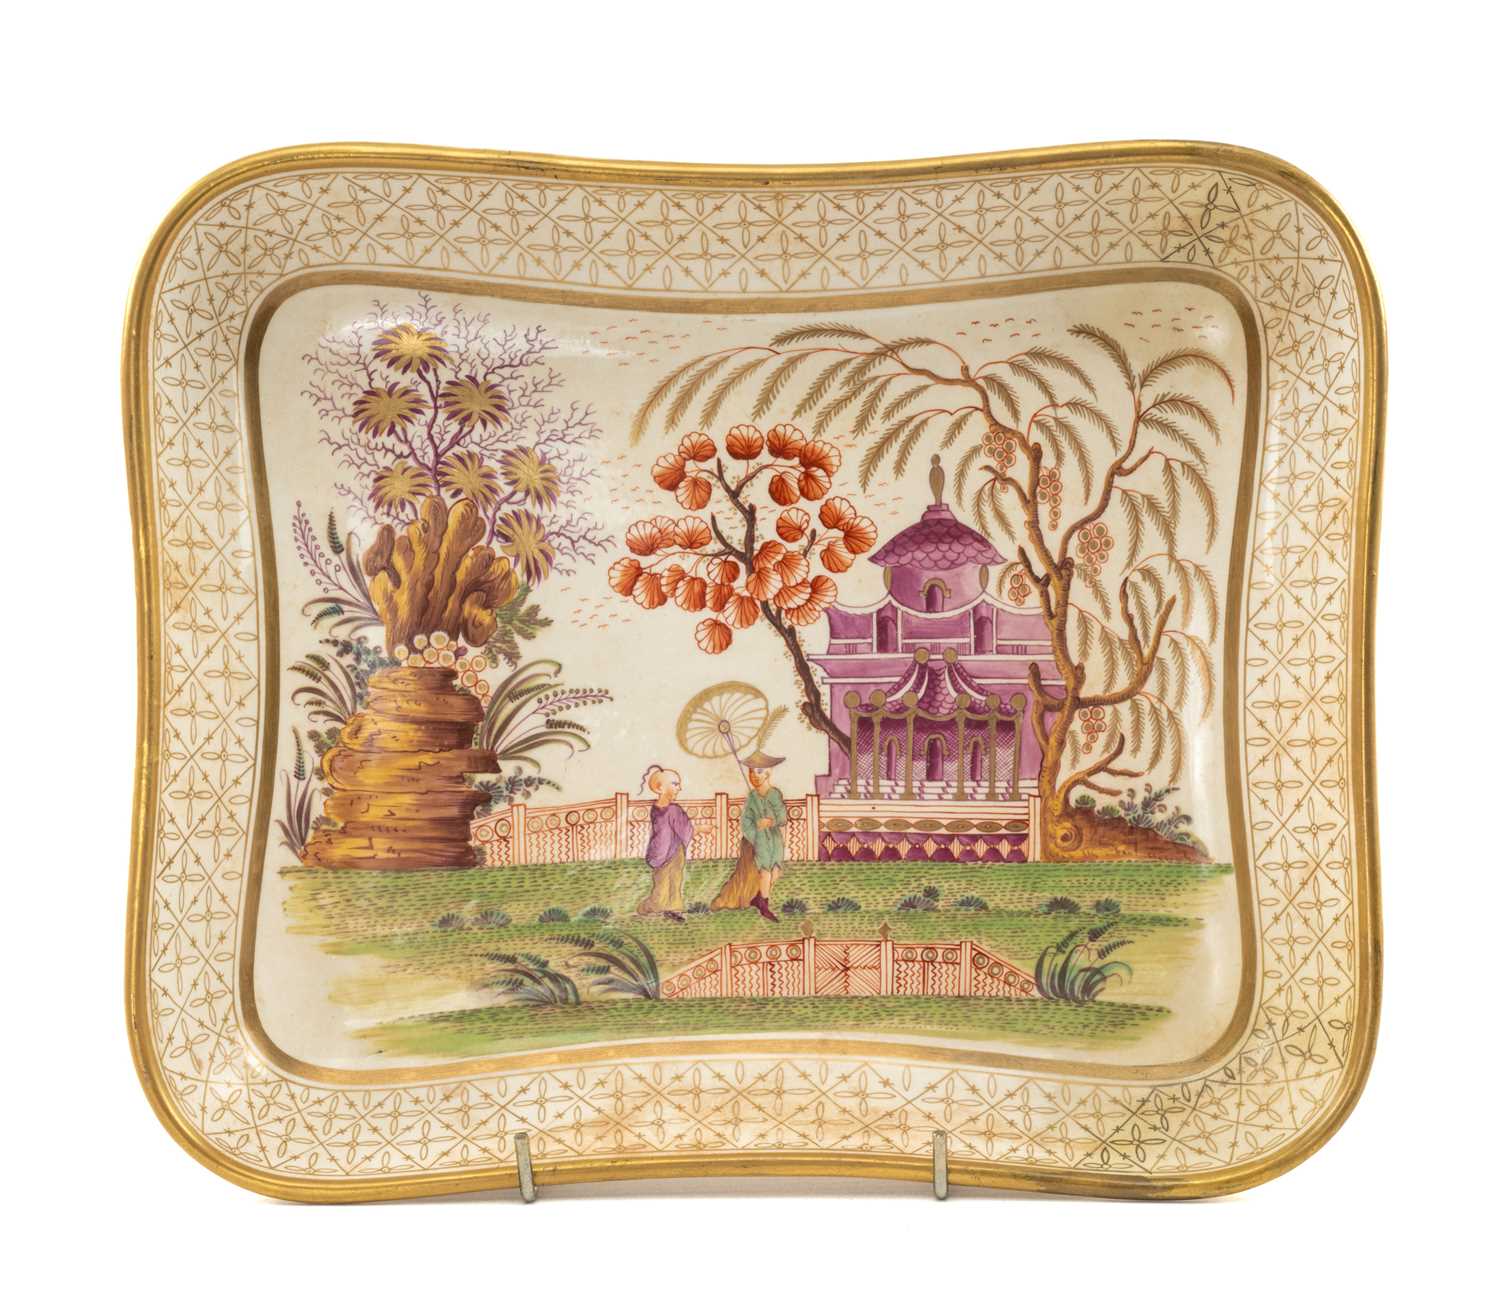 RARE DAVENPORT 'CHINESE TEMPLE' DESSERT DISH, c. 1806-7, painted with chinoiserie figures beside a